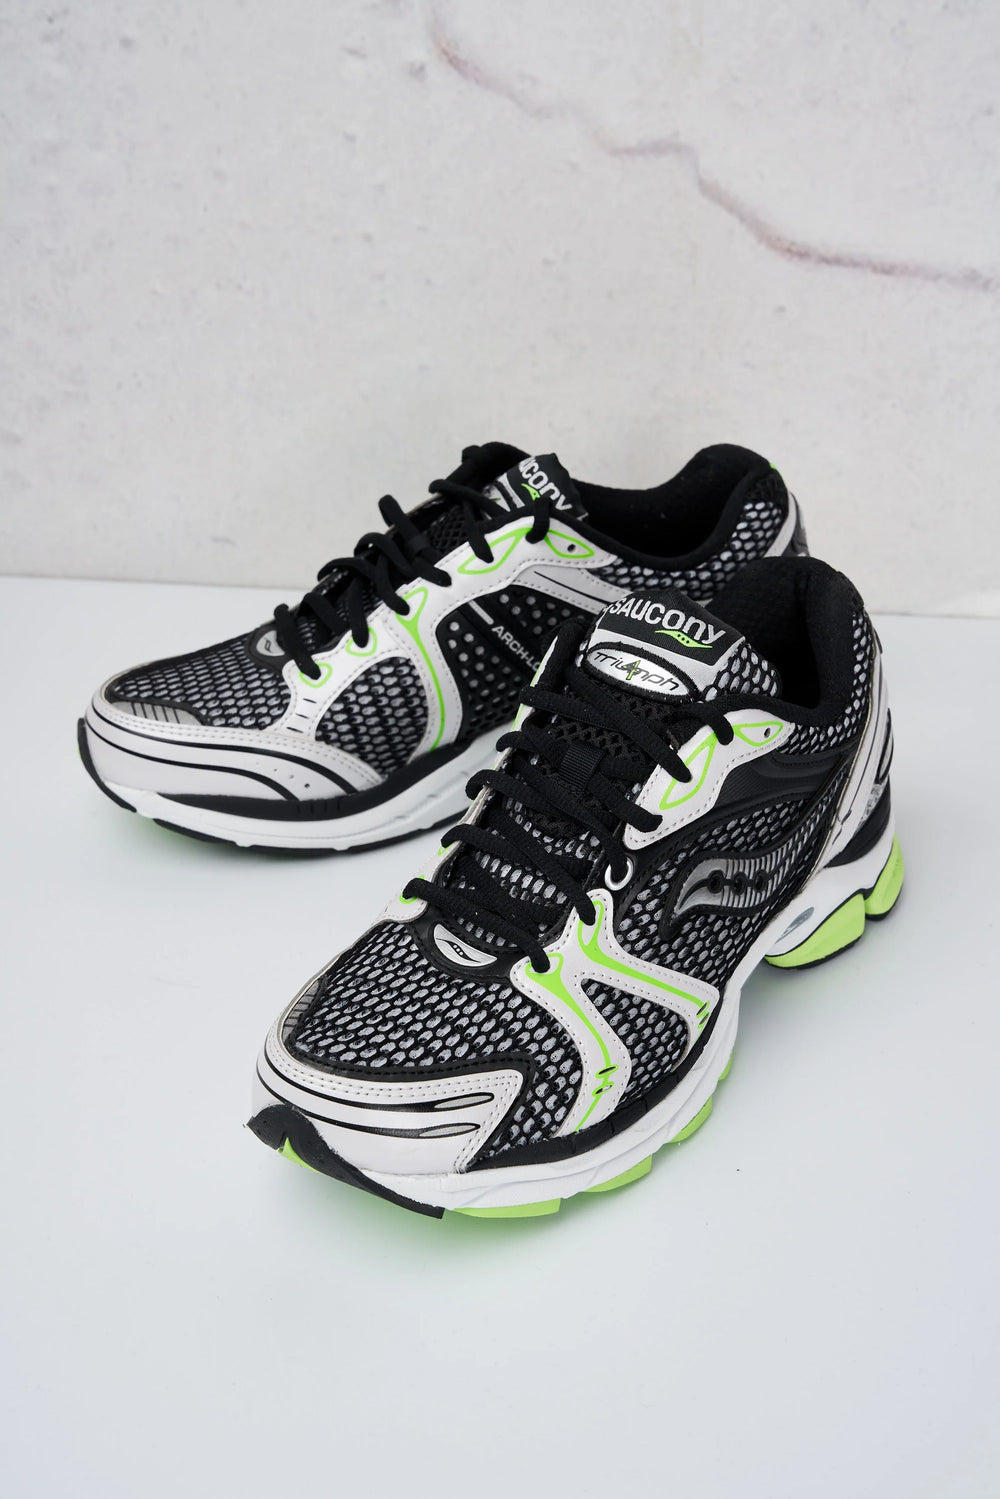 Discover the Saucony News Online: Innovation Meets Style